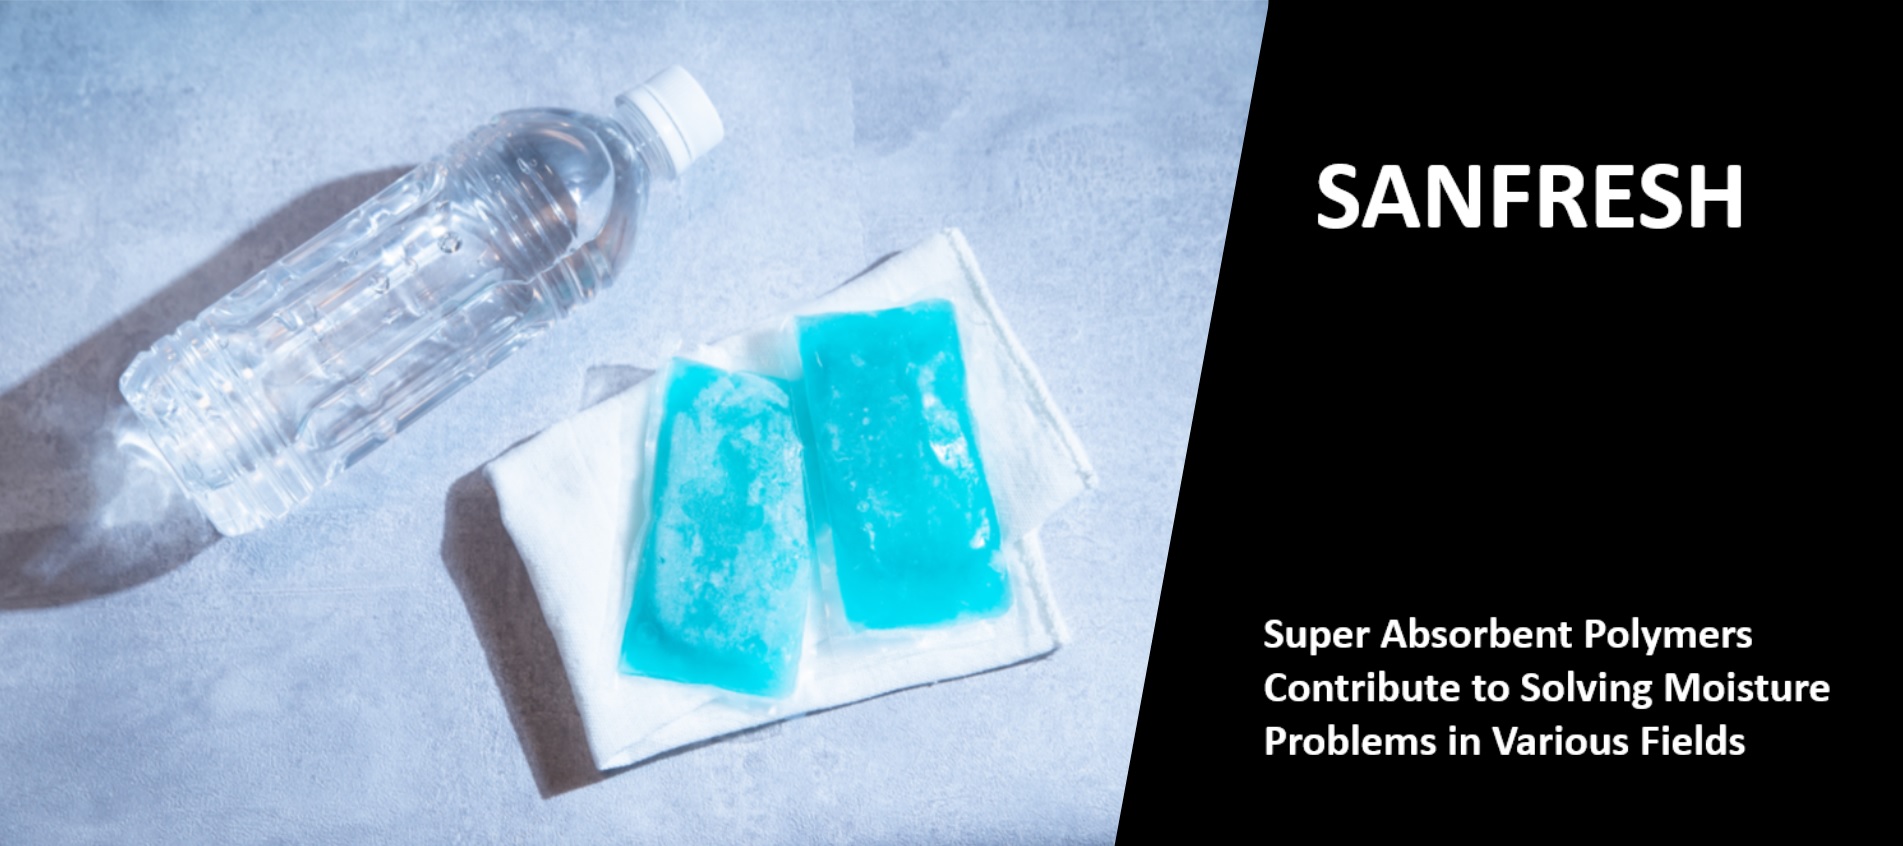 Superabsorbent Polymer (SAP) "SANFRESH" page is now open.